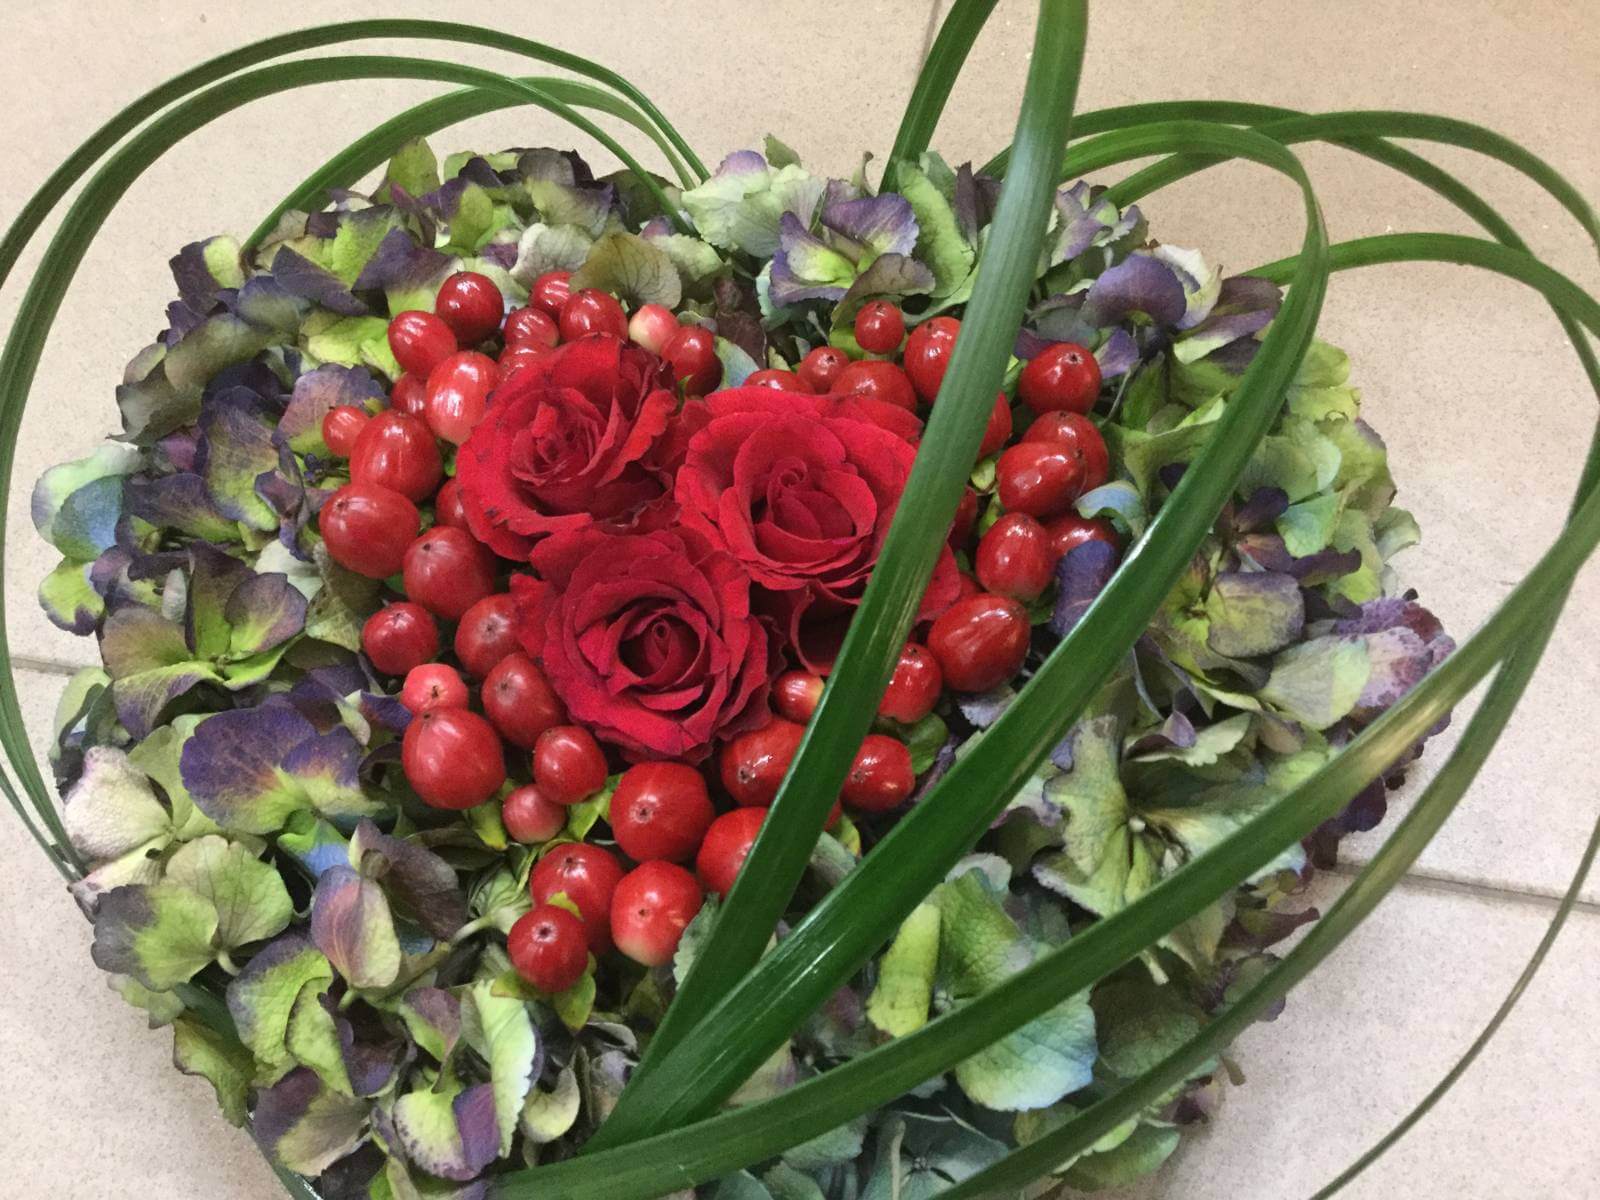 Flowers for Valentine's Day - Flowers and Marilena Ideas